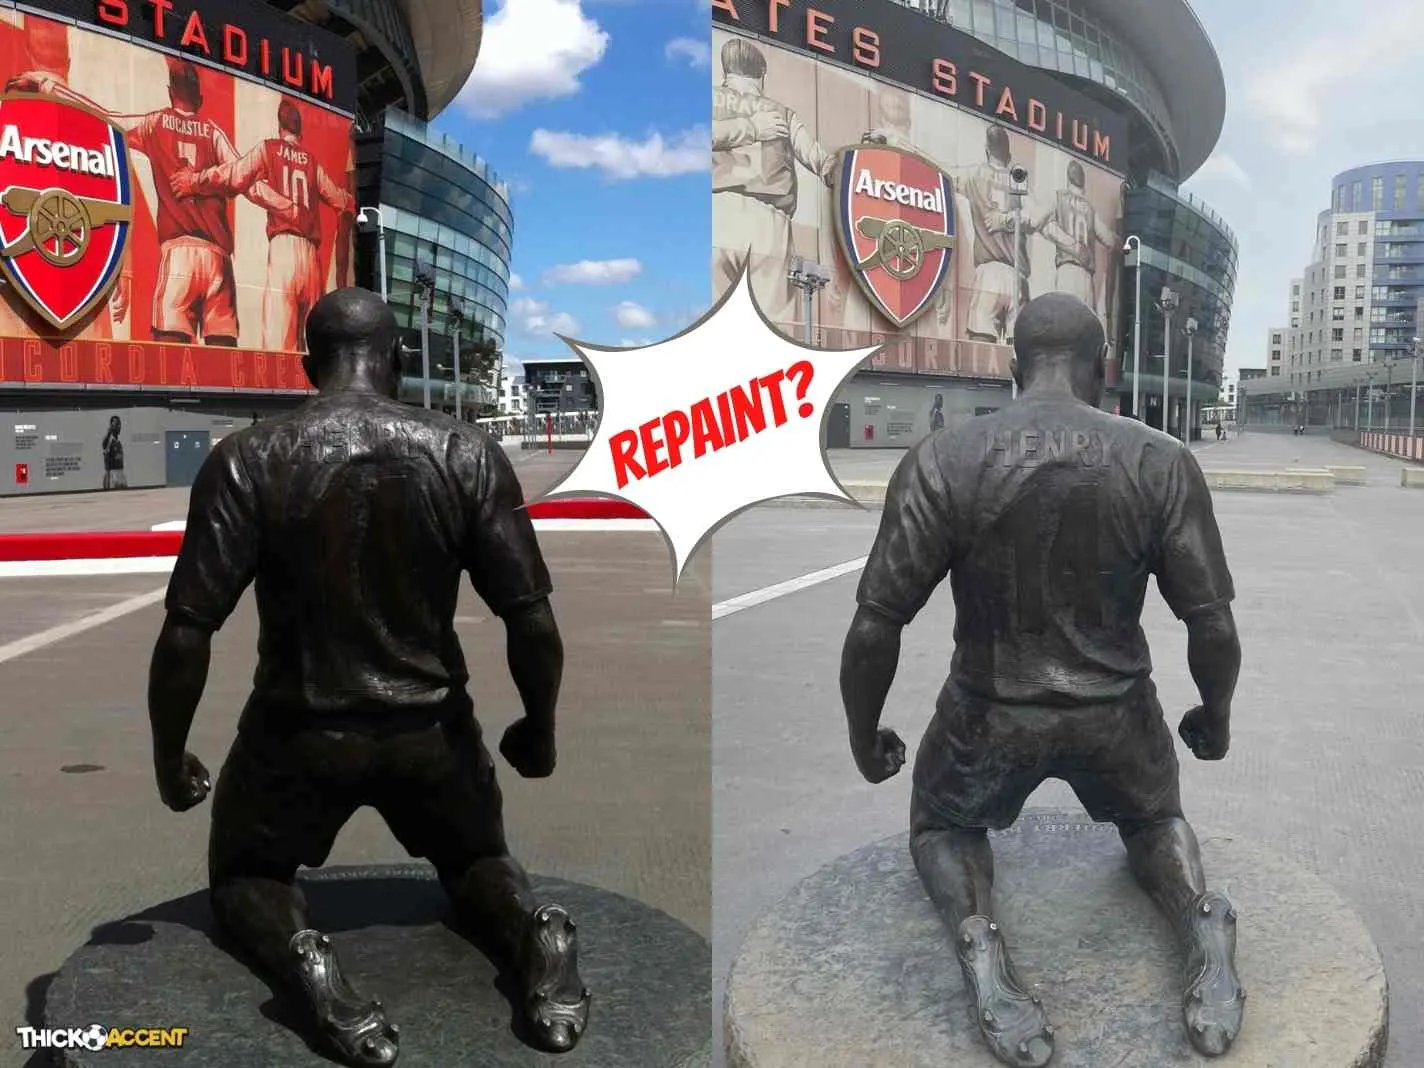 Faded Henry statue and Legends mural outside Emirates.